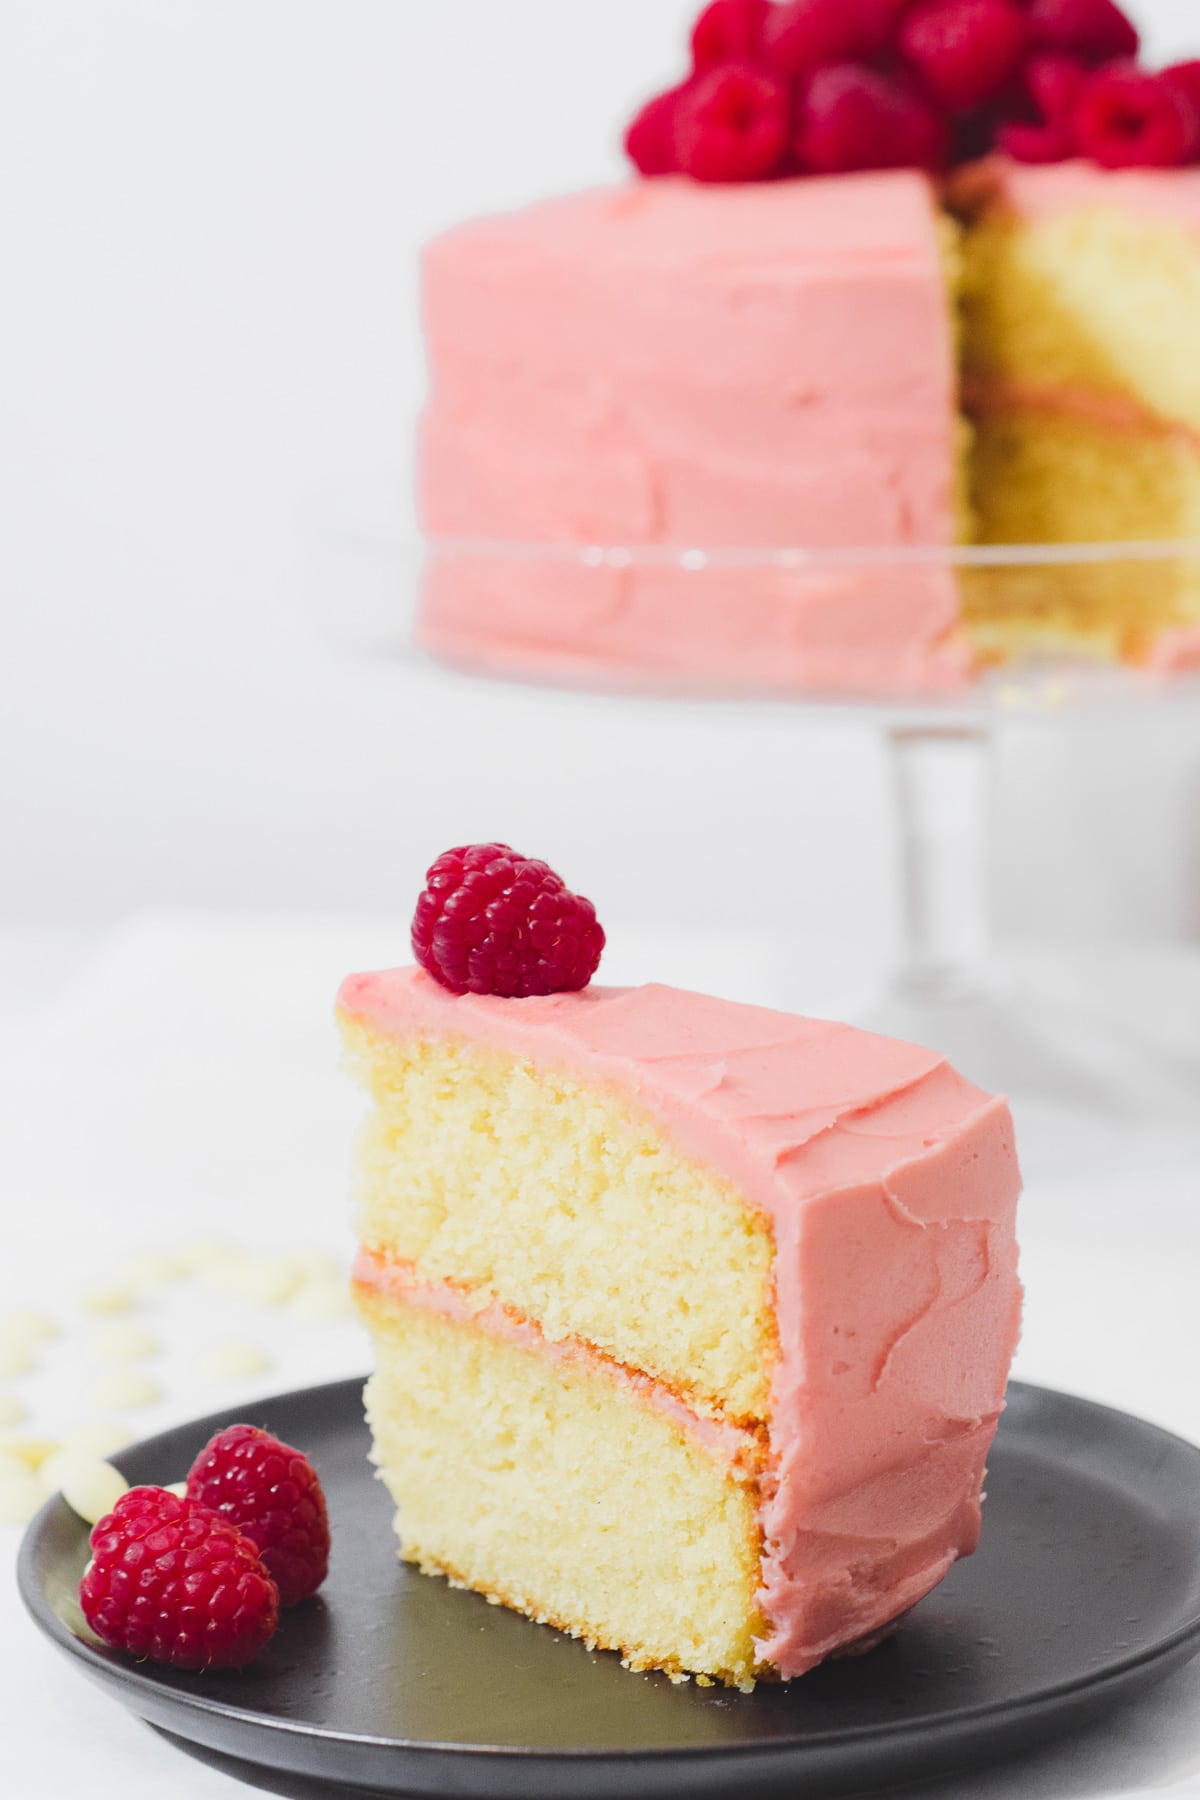 Slice of white chocolate cake with raspberry buttercream frosting a raspberry on top. Whole raspberry cake in the background.